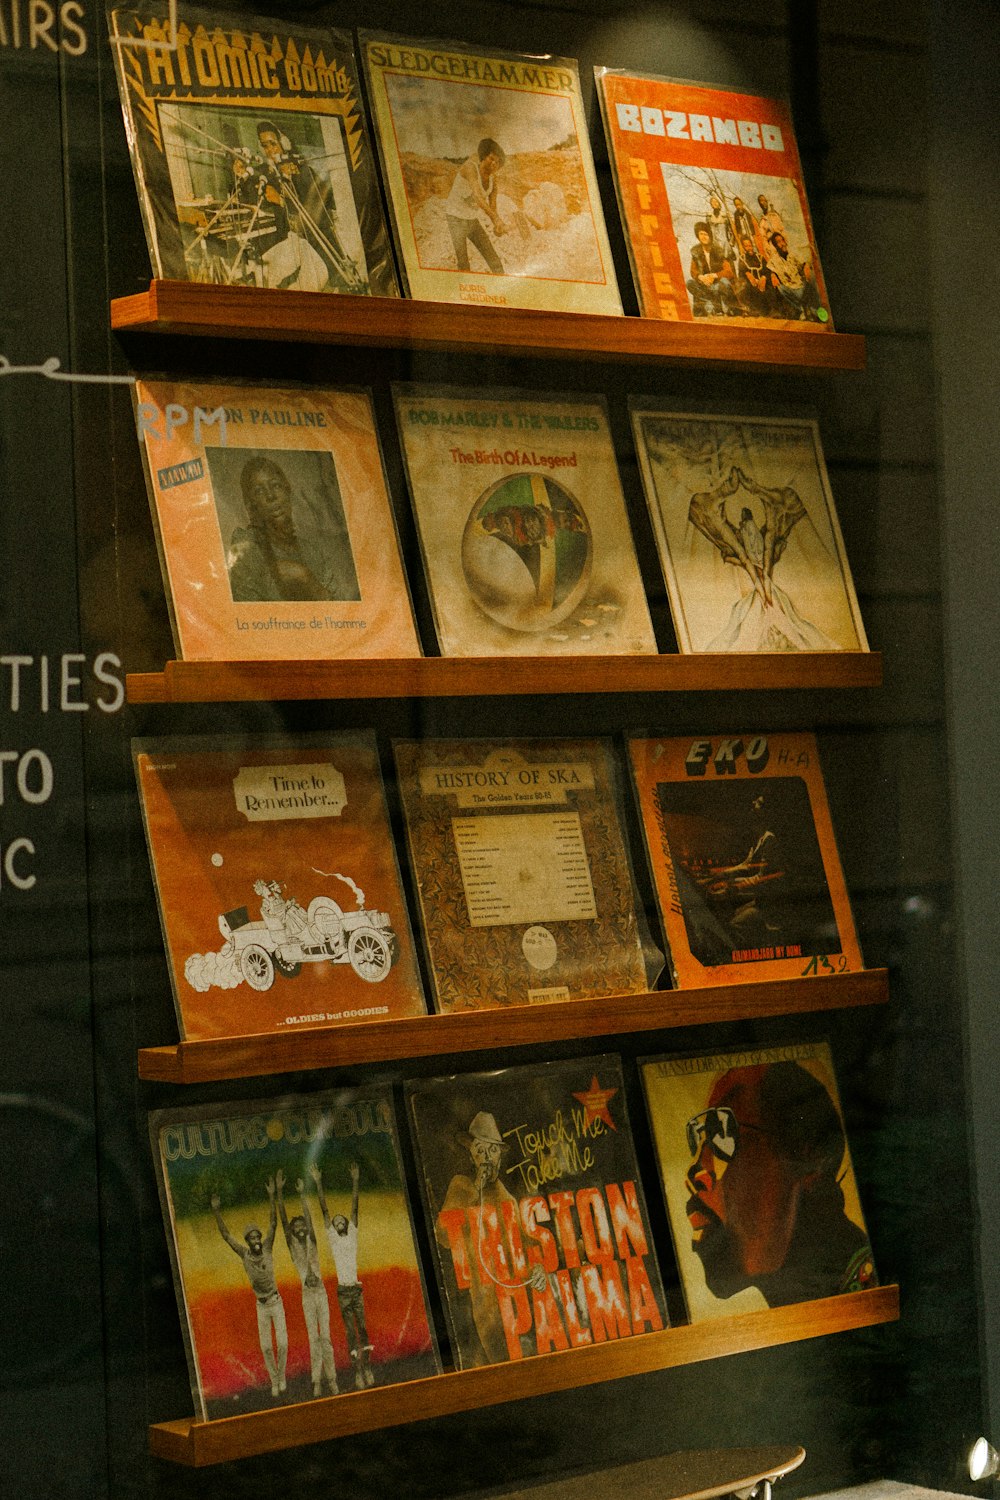 a display of various records in a store window